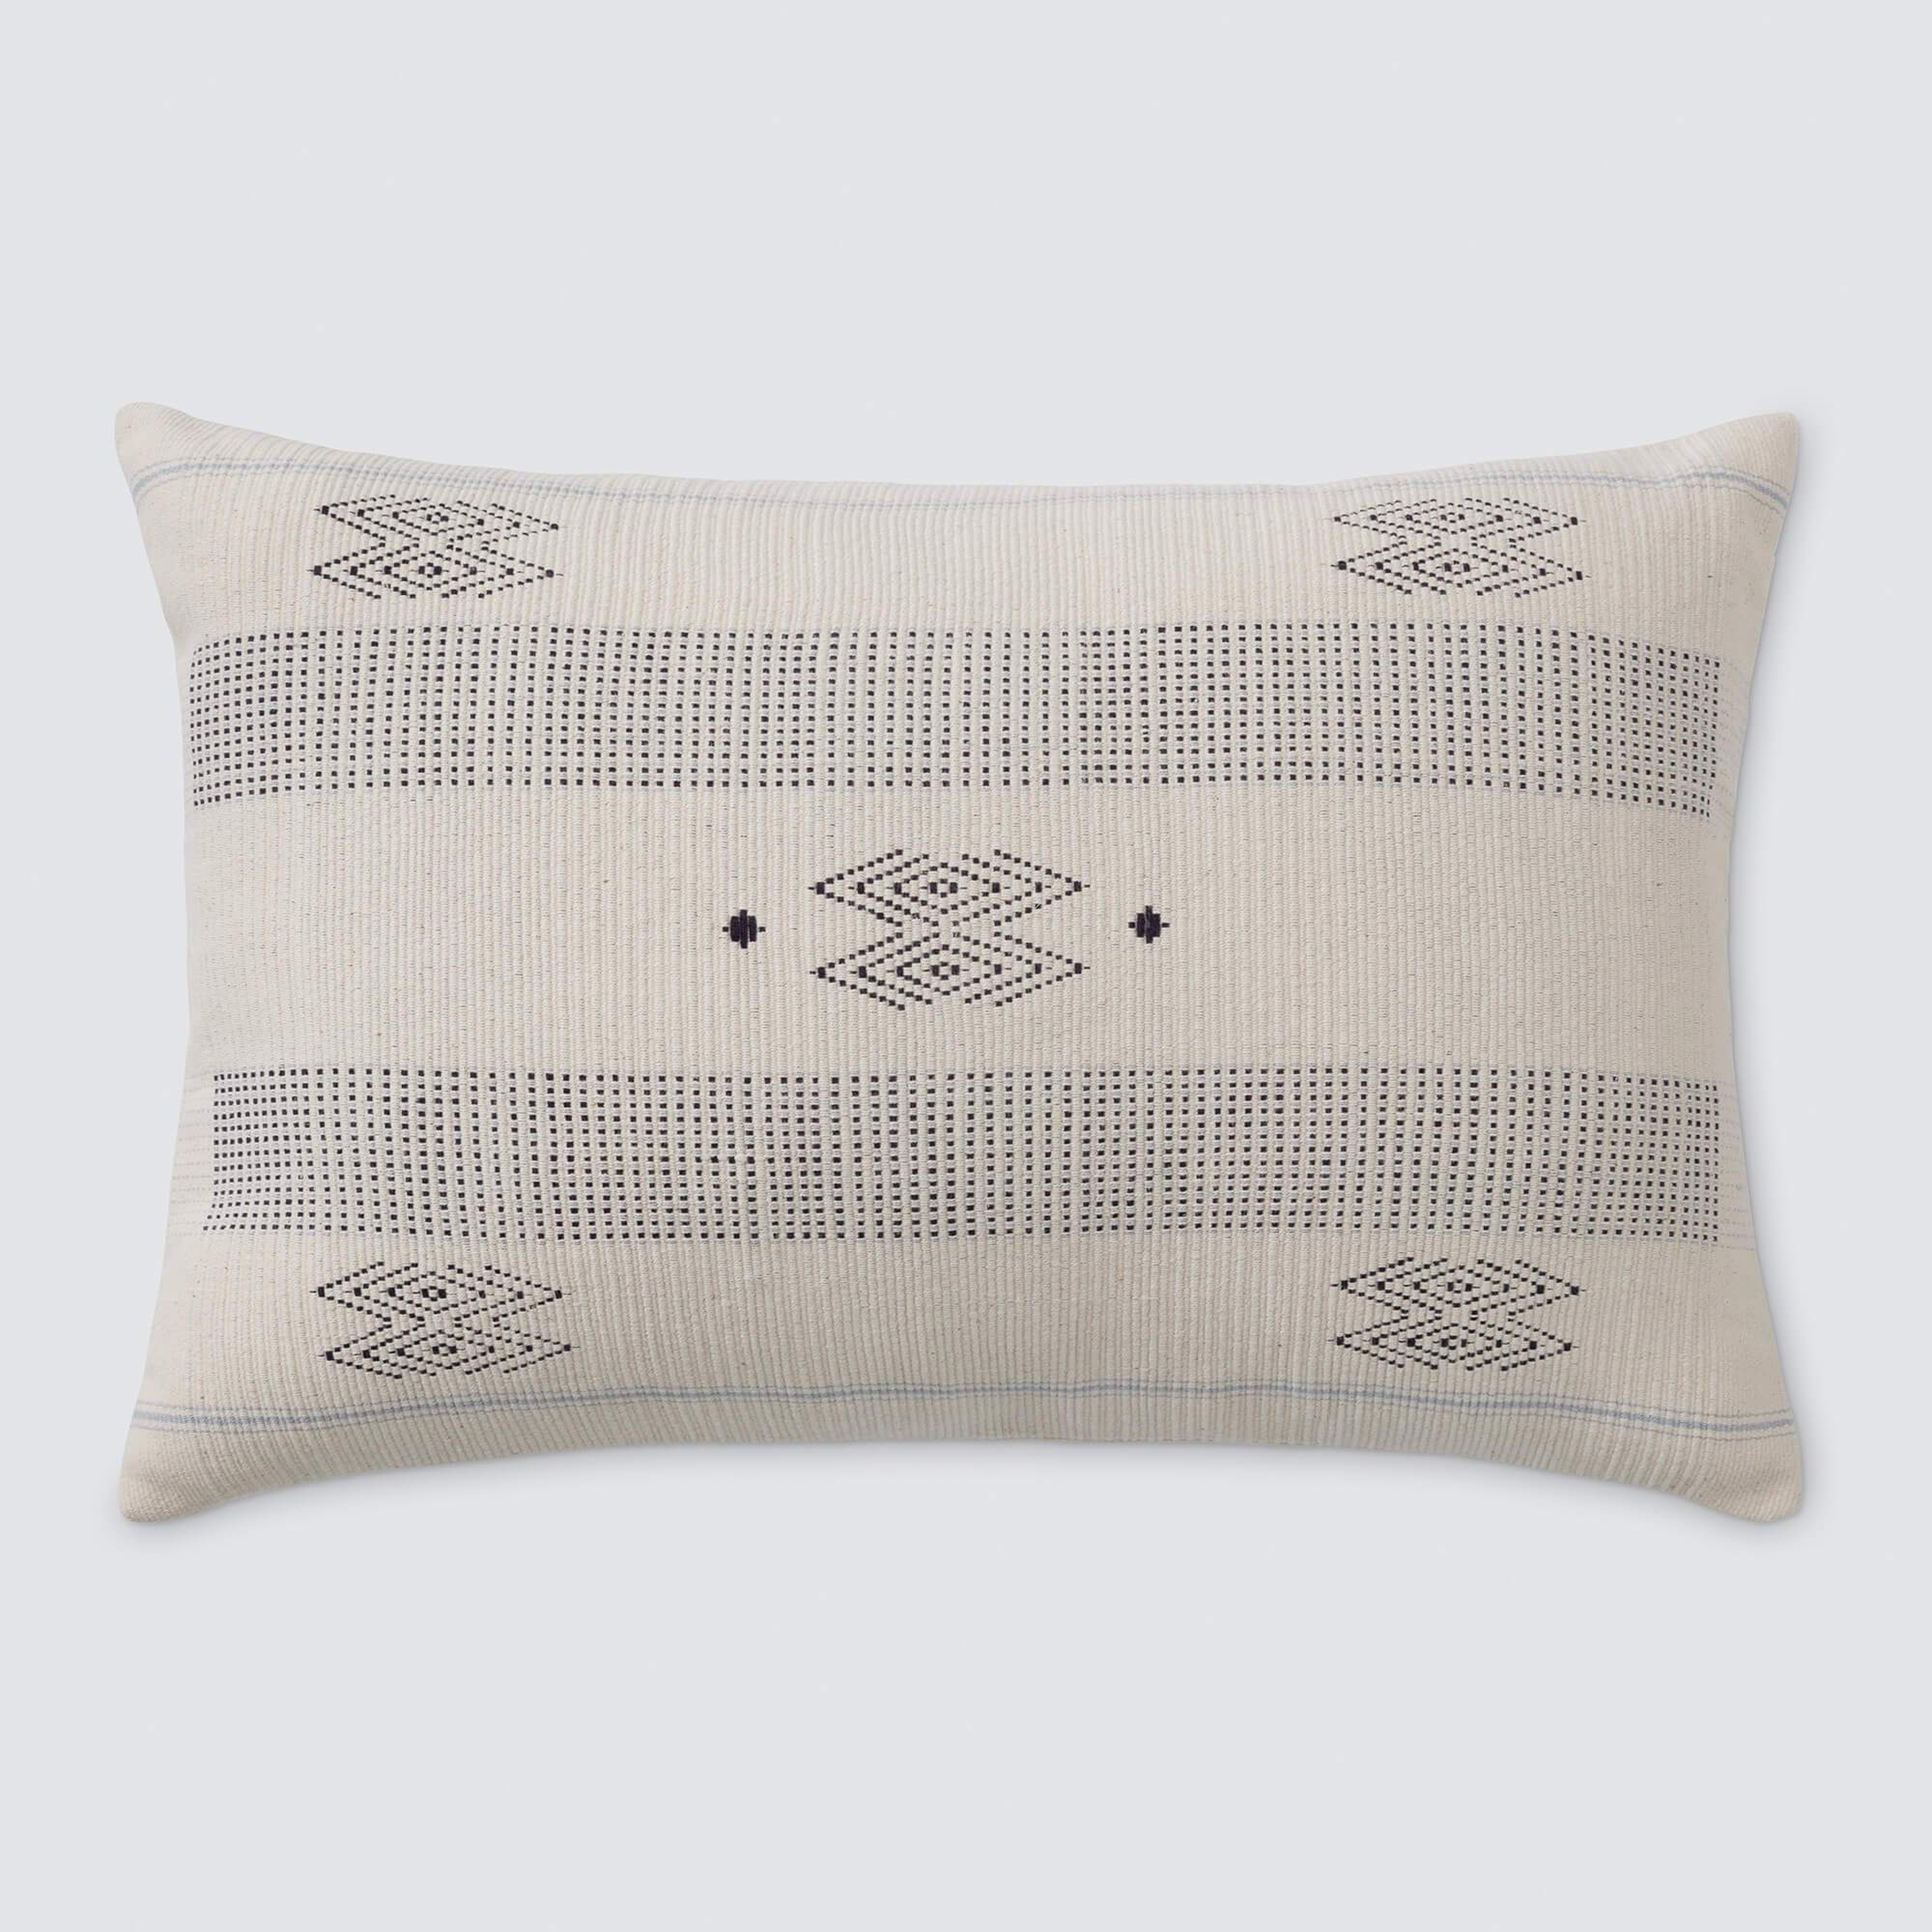 Lotha Lumbar Pillow By The Citizenry - The Citizenry